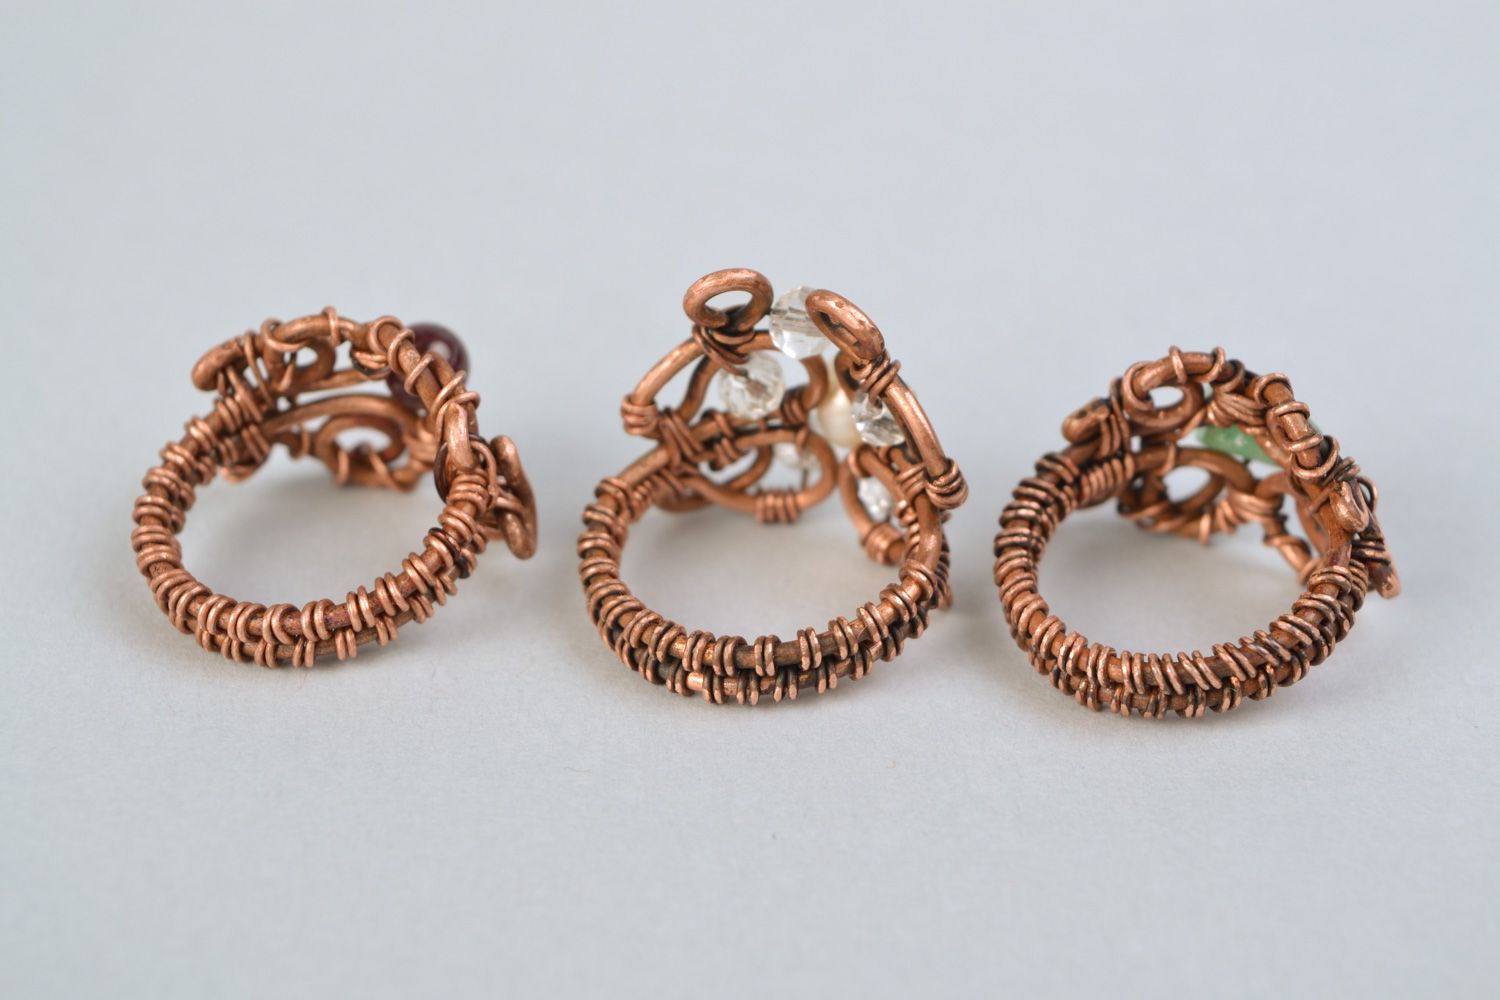 Details about   Antiqued Thick Copper Wire Wrapped Ring Any Size Mba Handmade Artisan Jewelry 